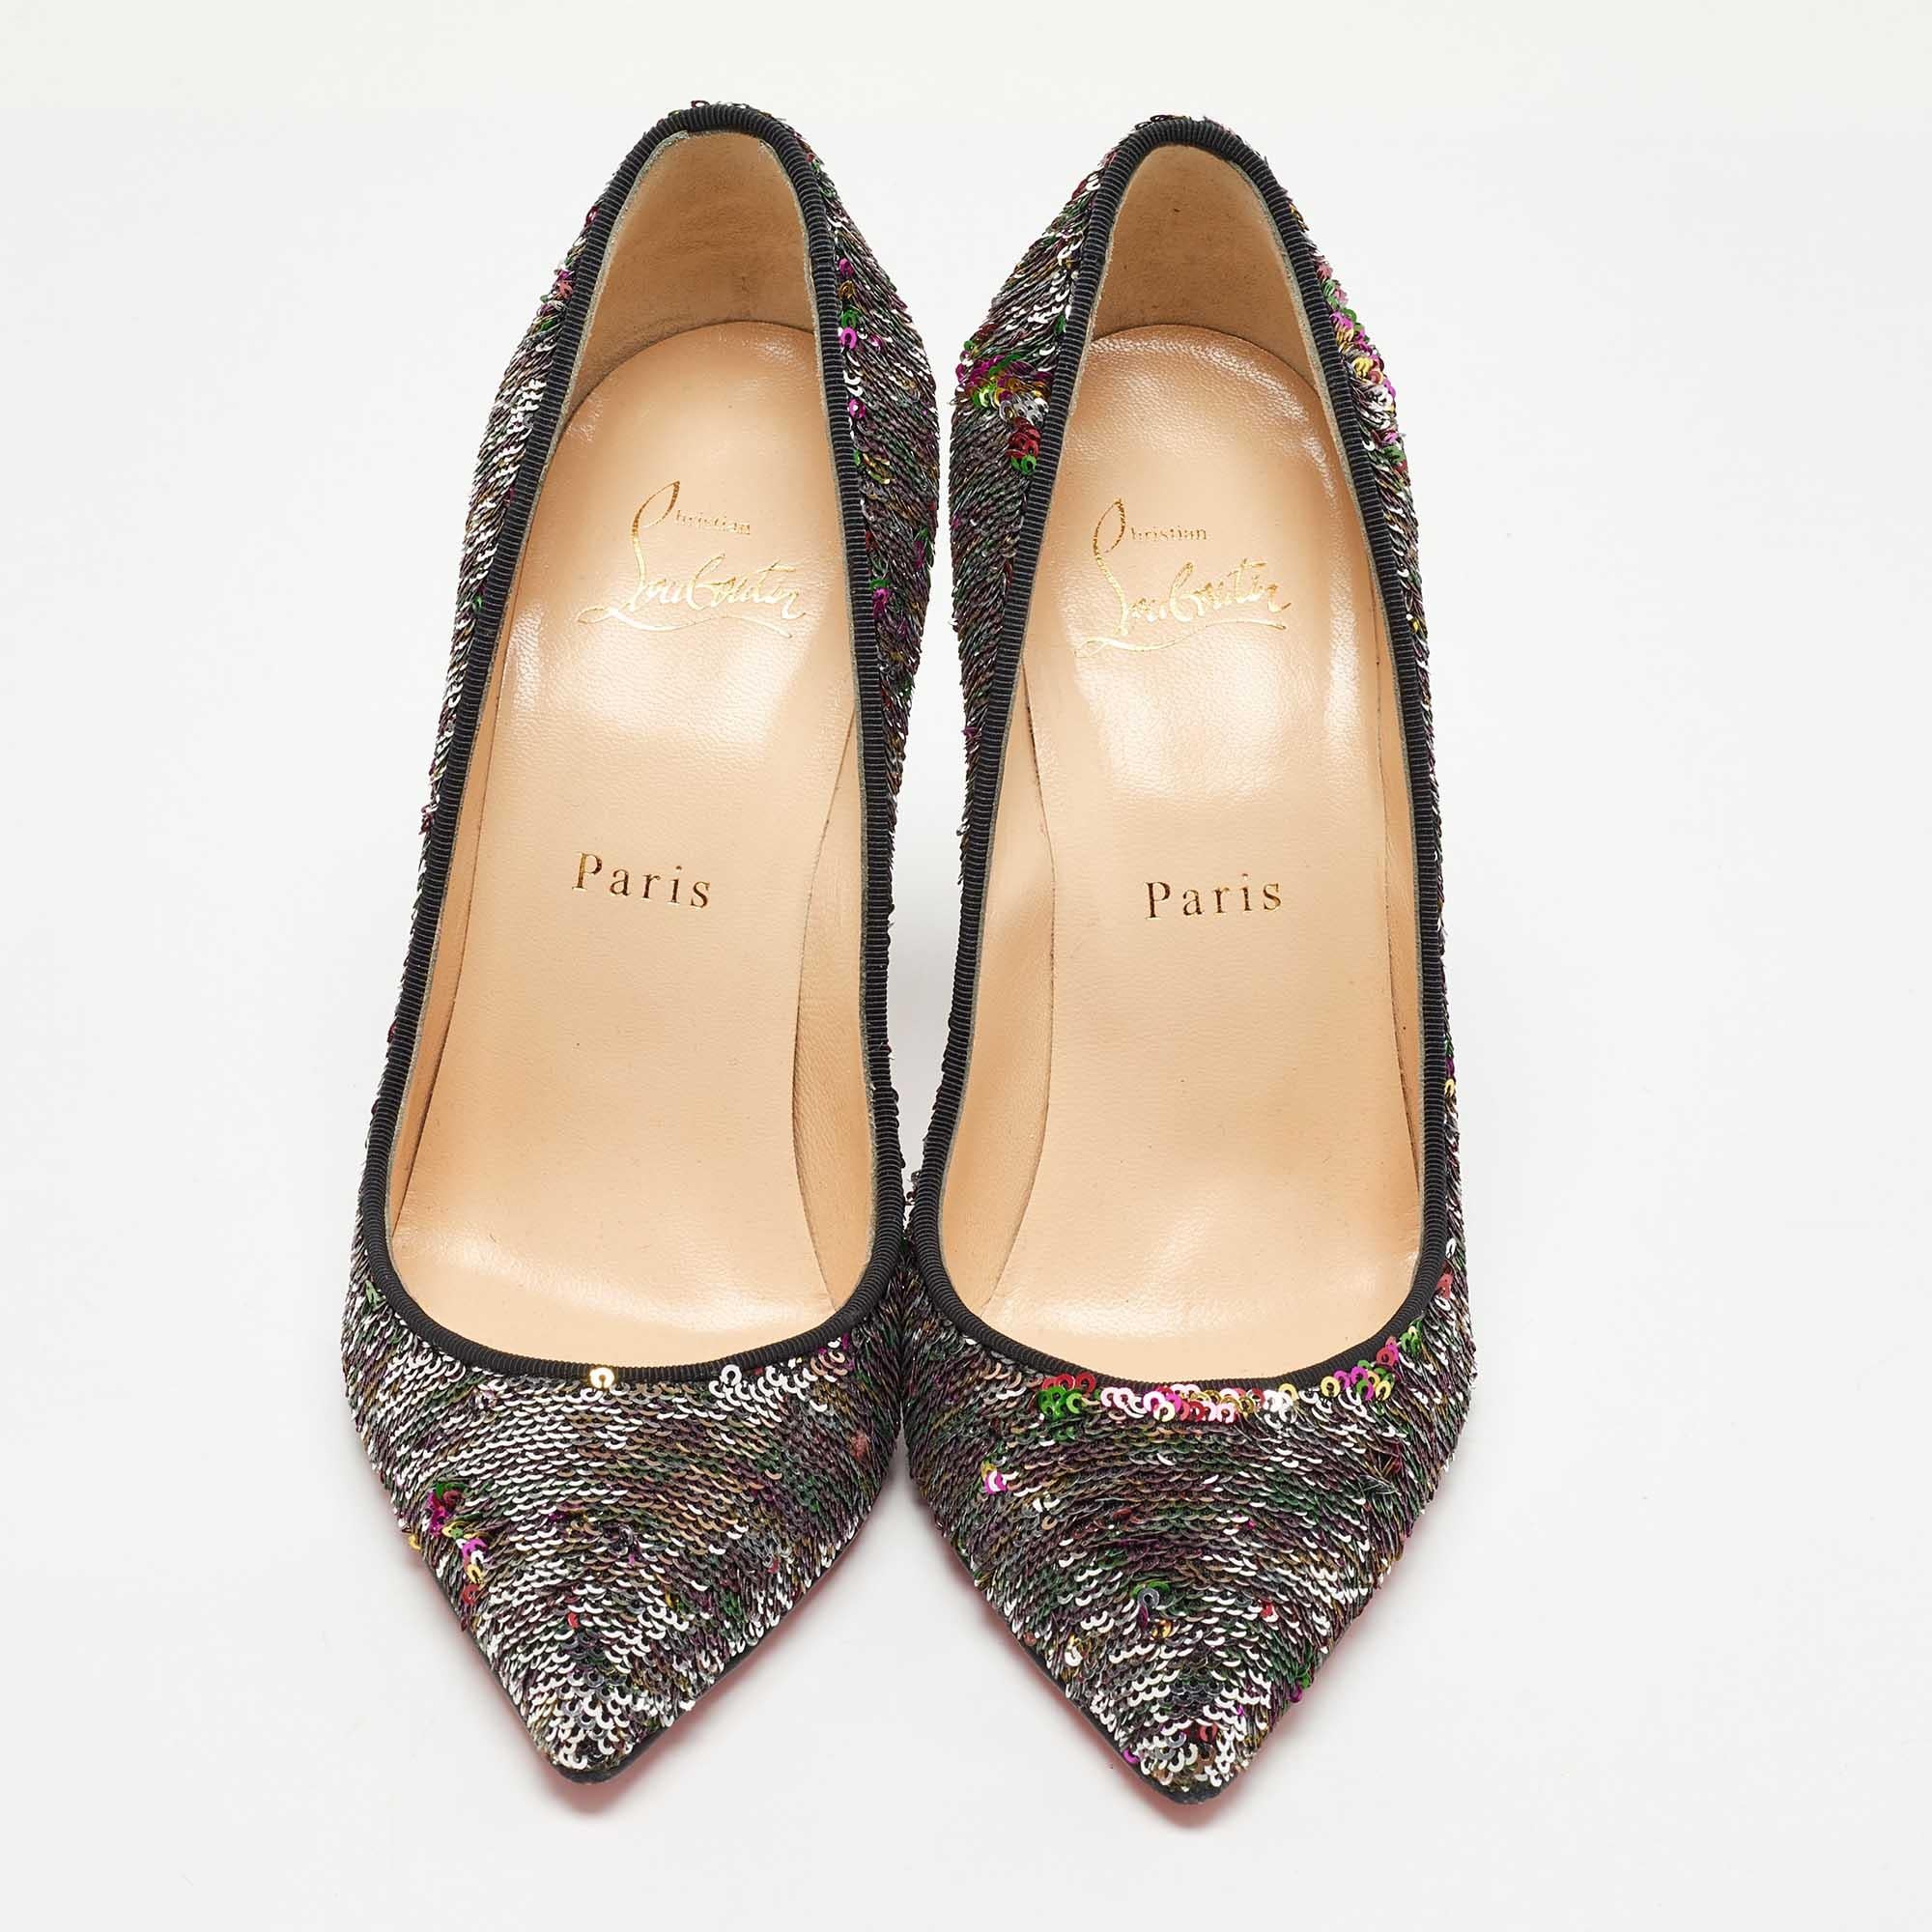 The architectural silhouette and contemporary design of this pair of Christian Louboutin pumps exemplify the brand's mastery in the art of stiletto making. Finely created from multicolored sequins, it stands elegantly on 11cm heels. The signature